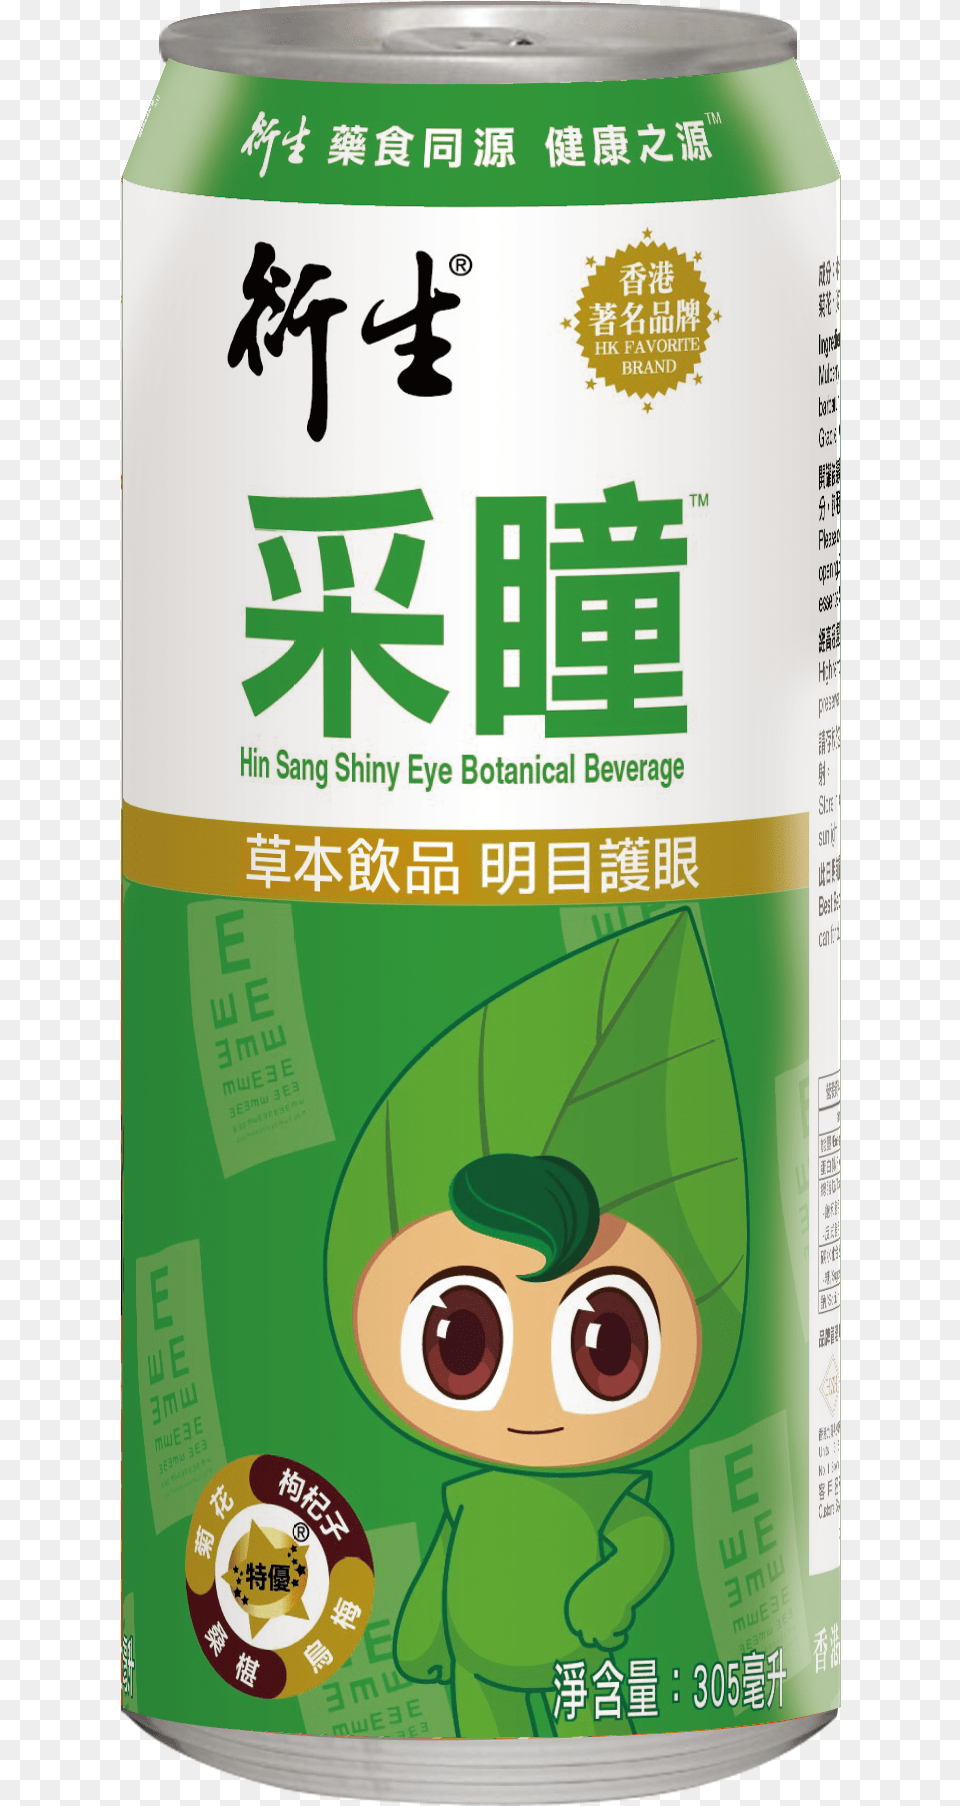 Shiny Eye Botanical Beverage Hin Sang Exquisite Packing Milk Supplement, Can, Tin, Face, Head Png Image